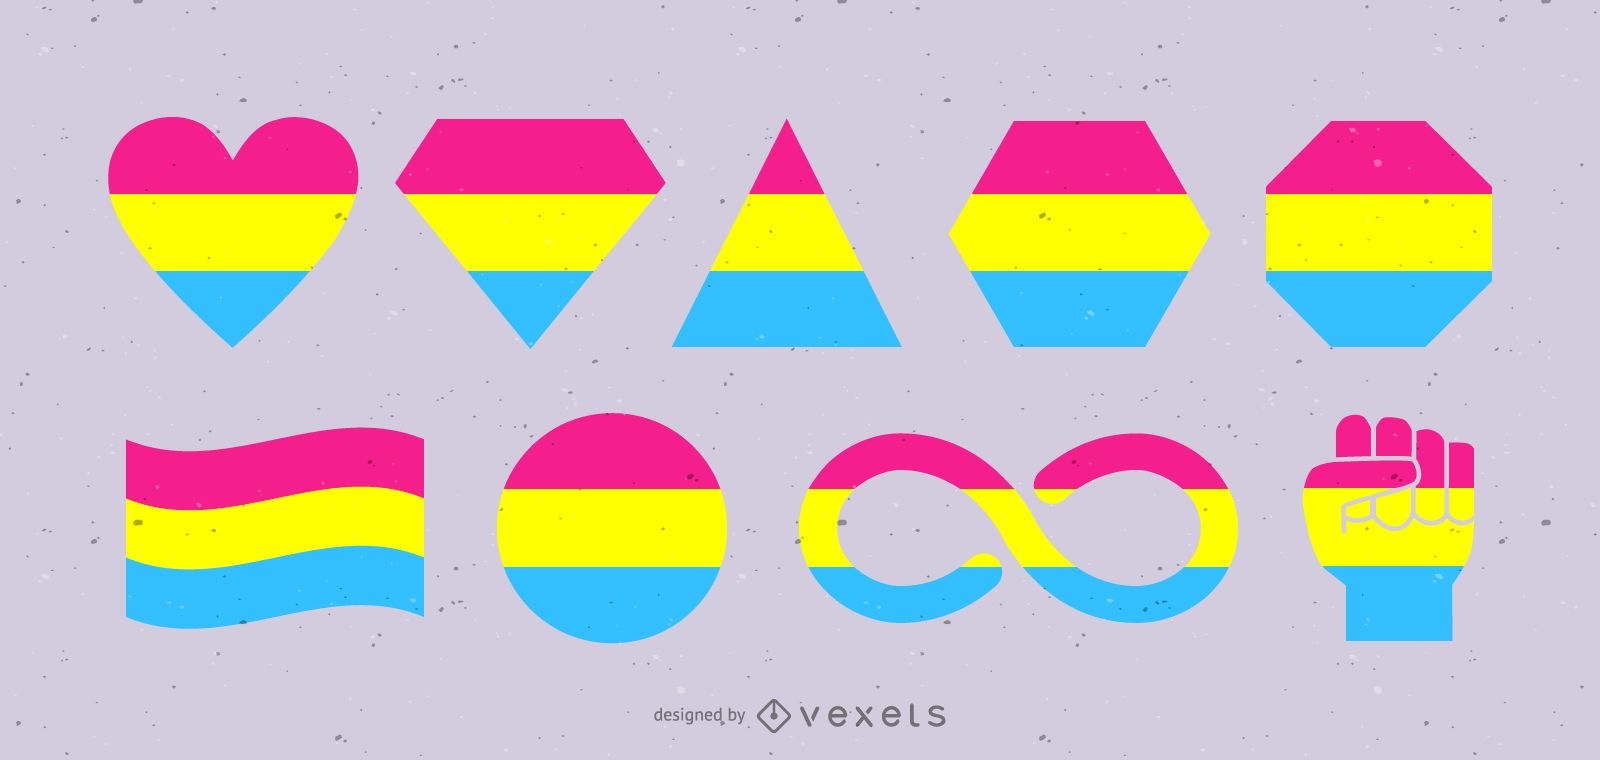 Pansexual Flags and Shapes Set